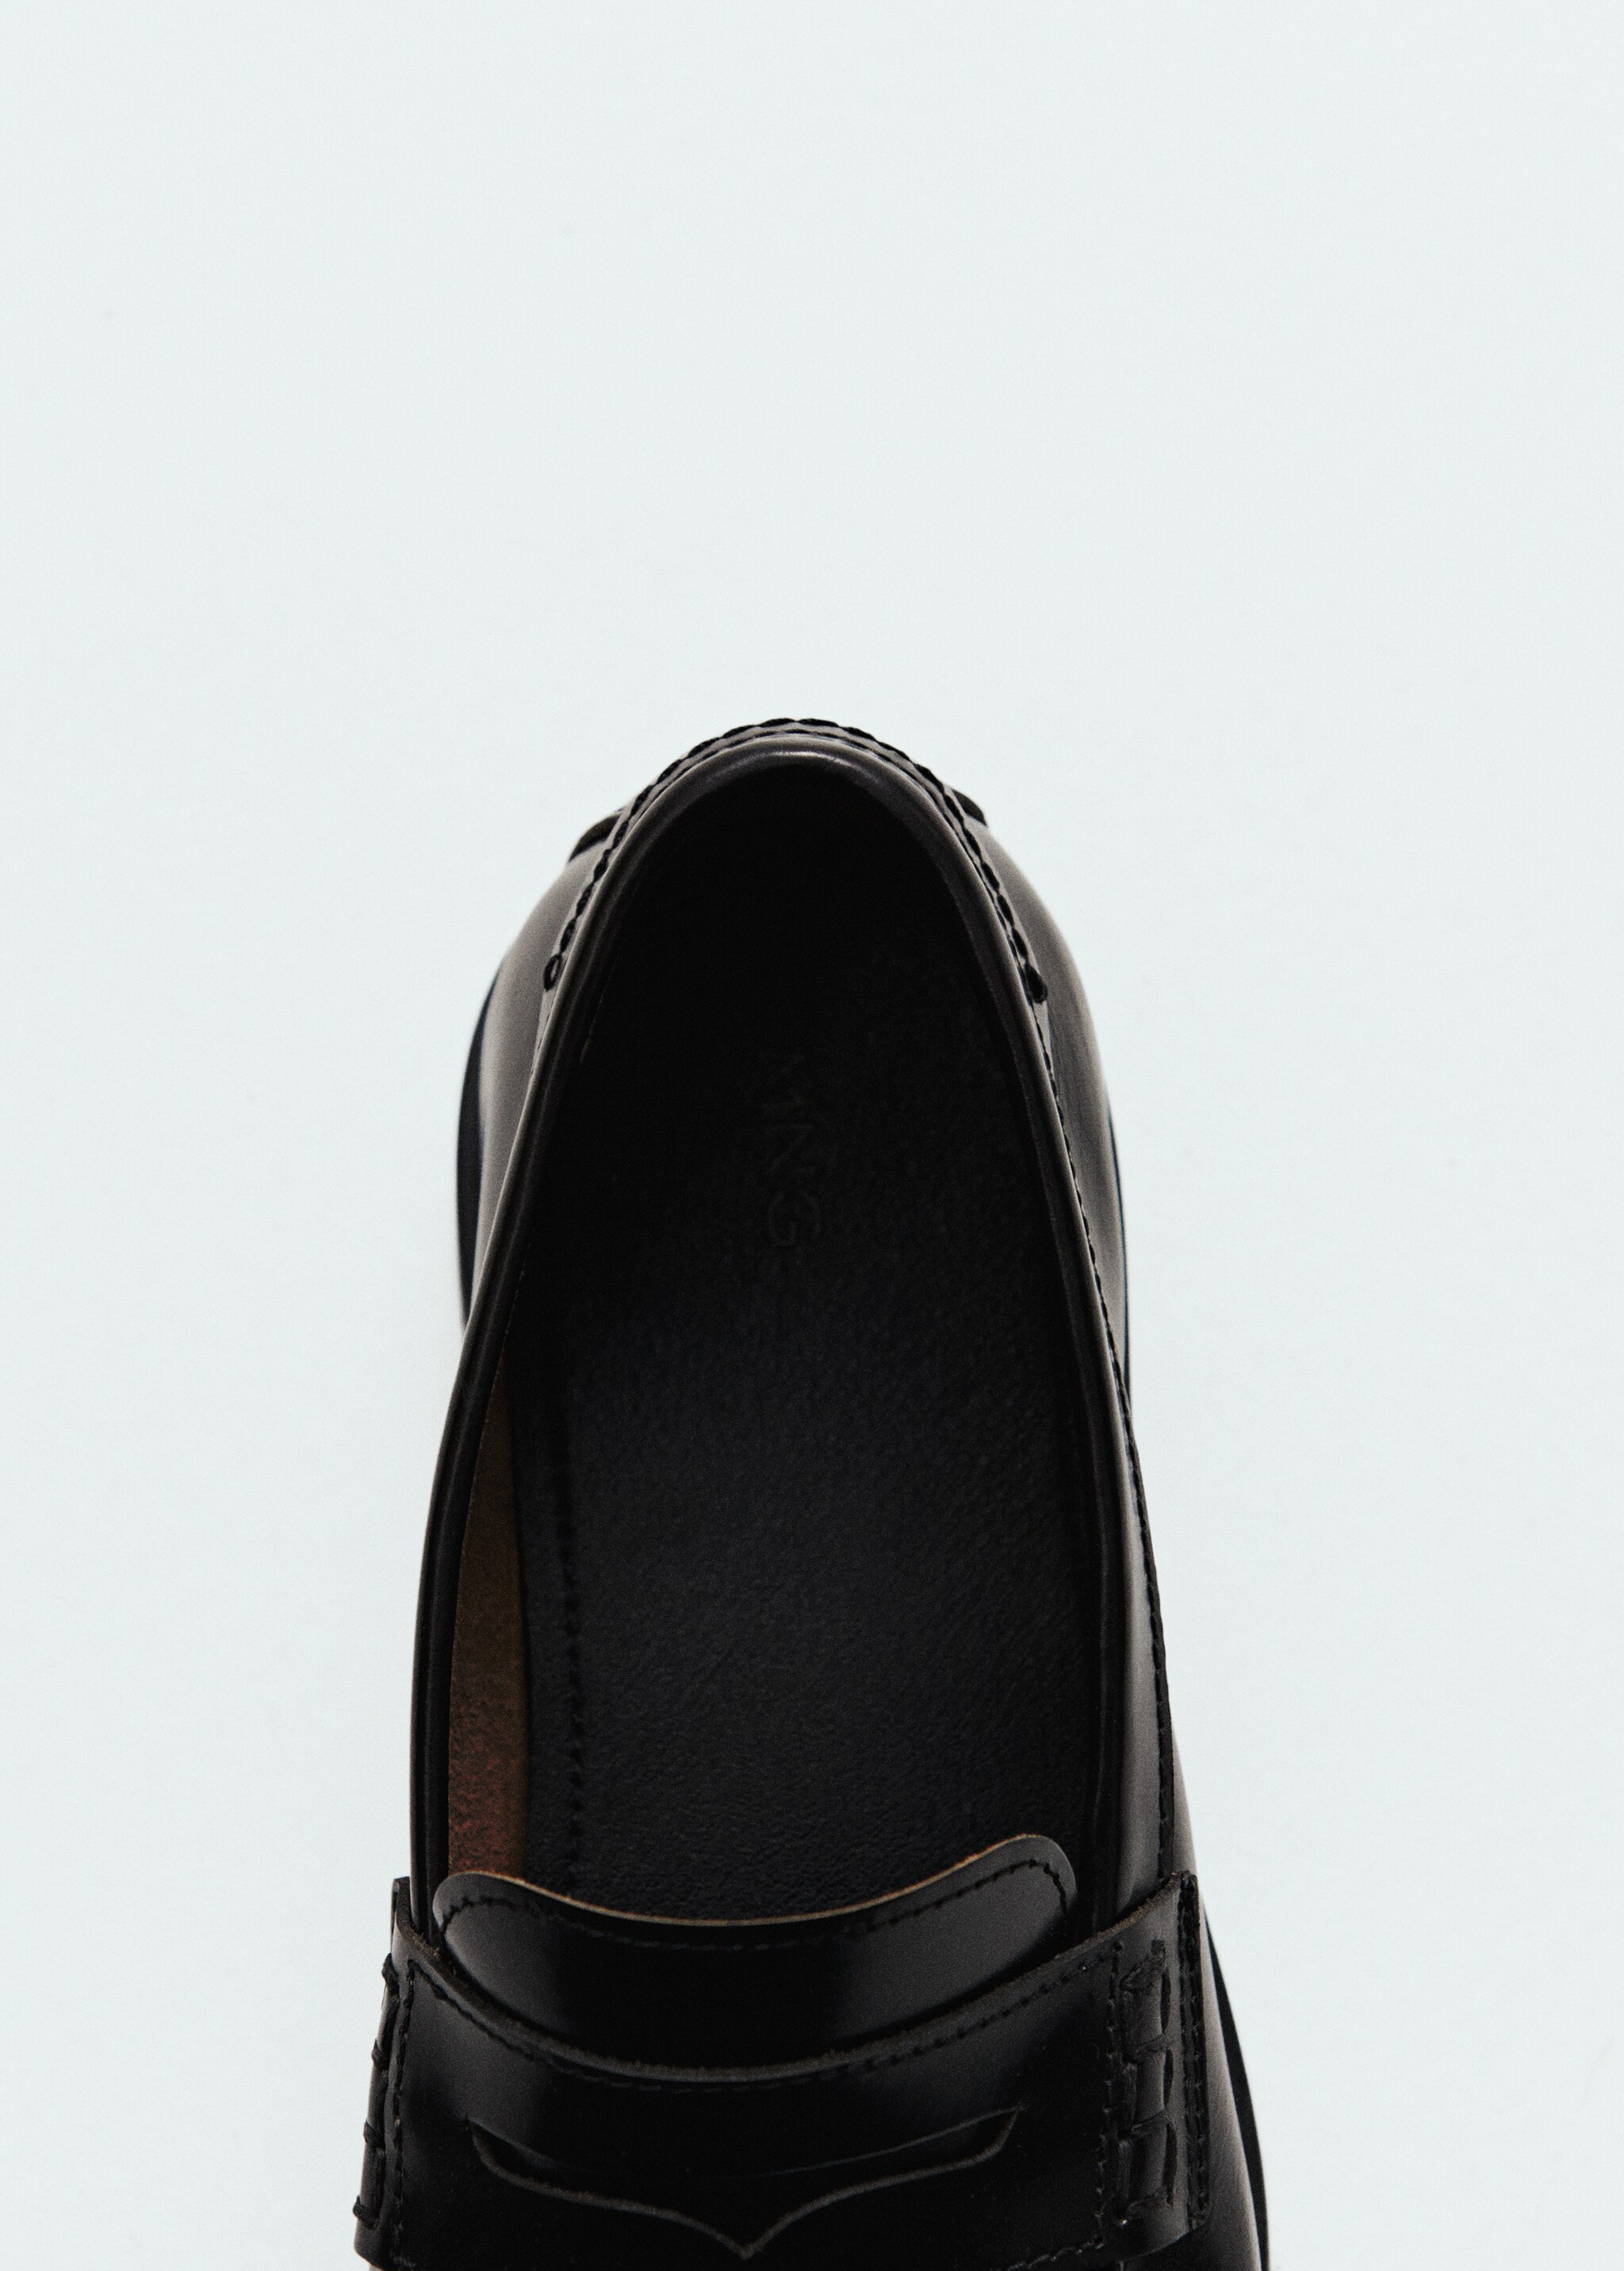 Aged-leather loafers - Details of the article 6